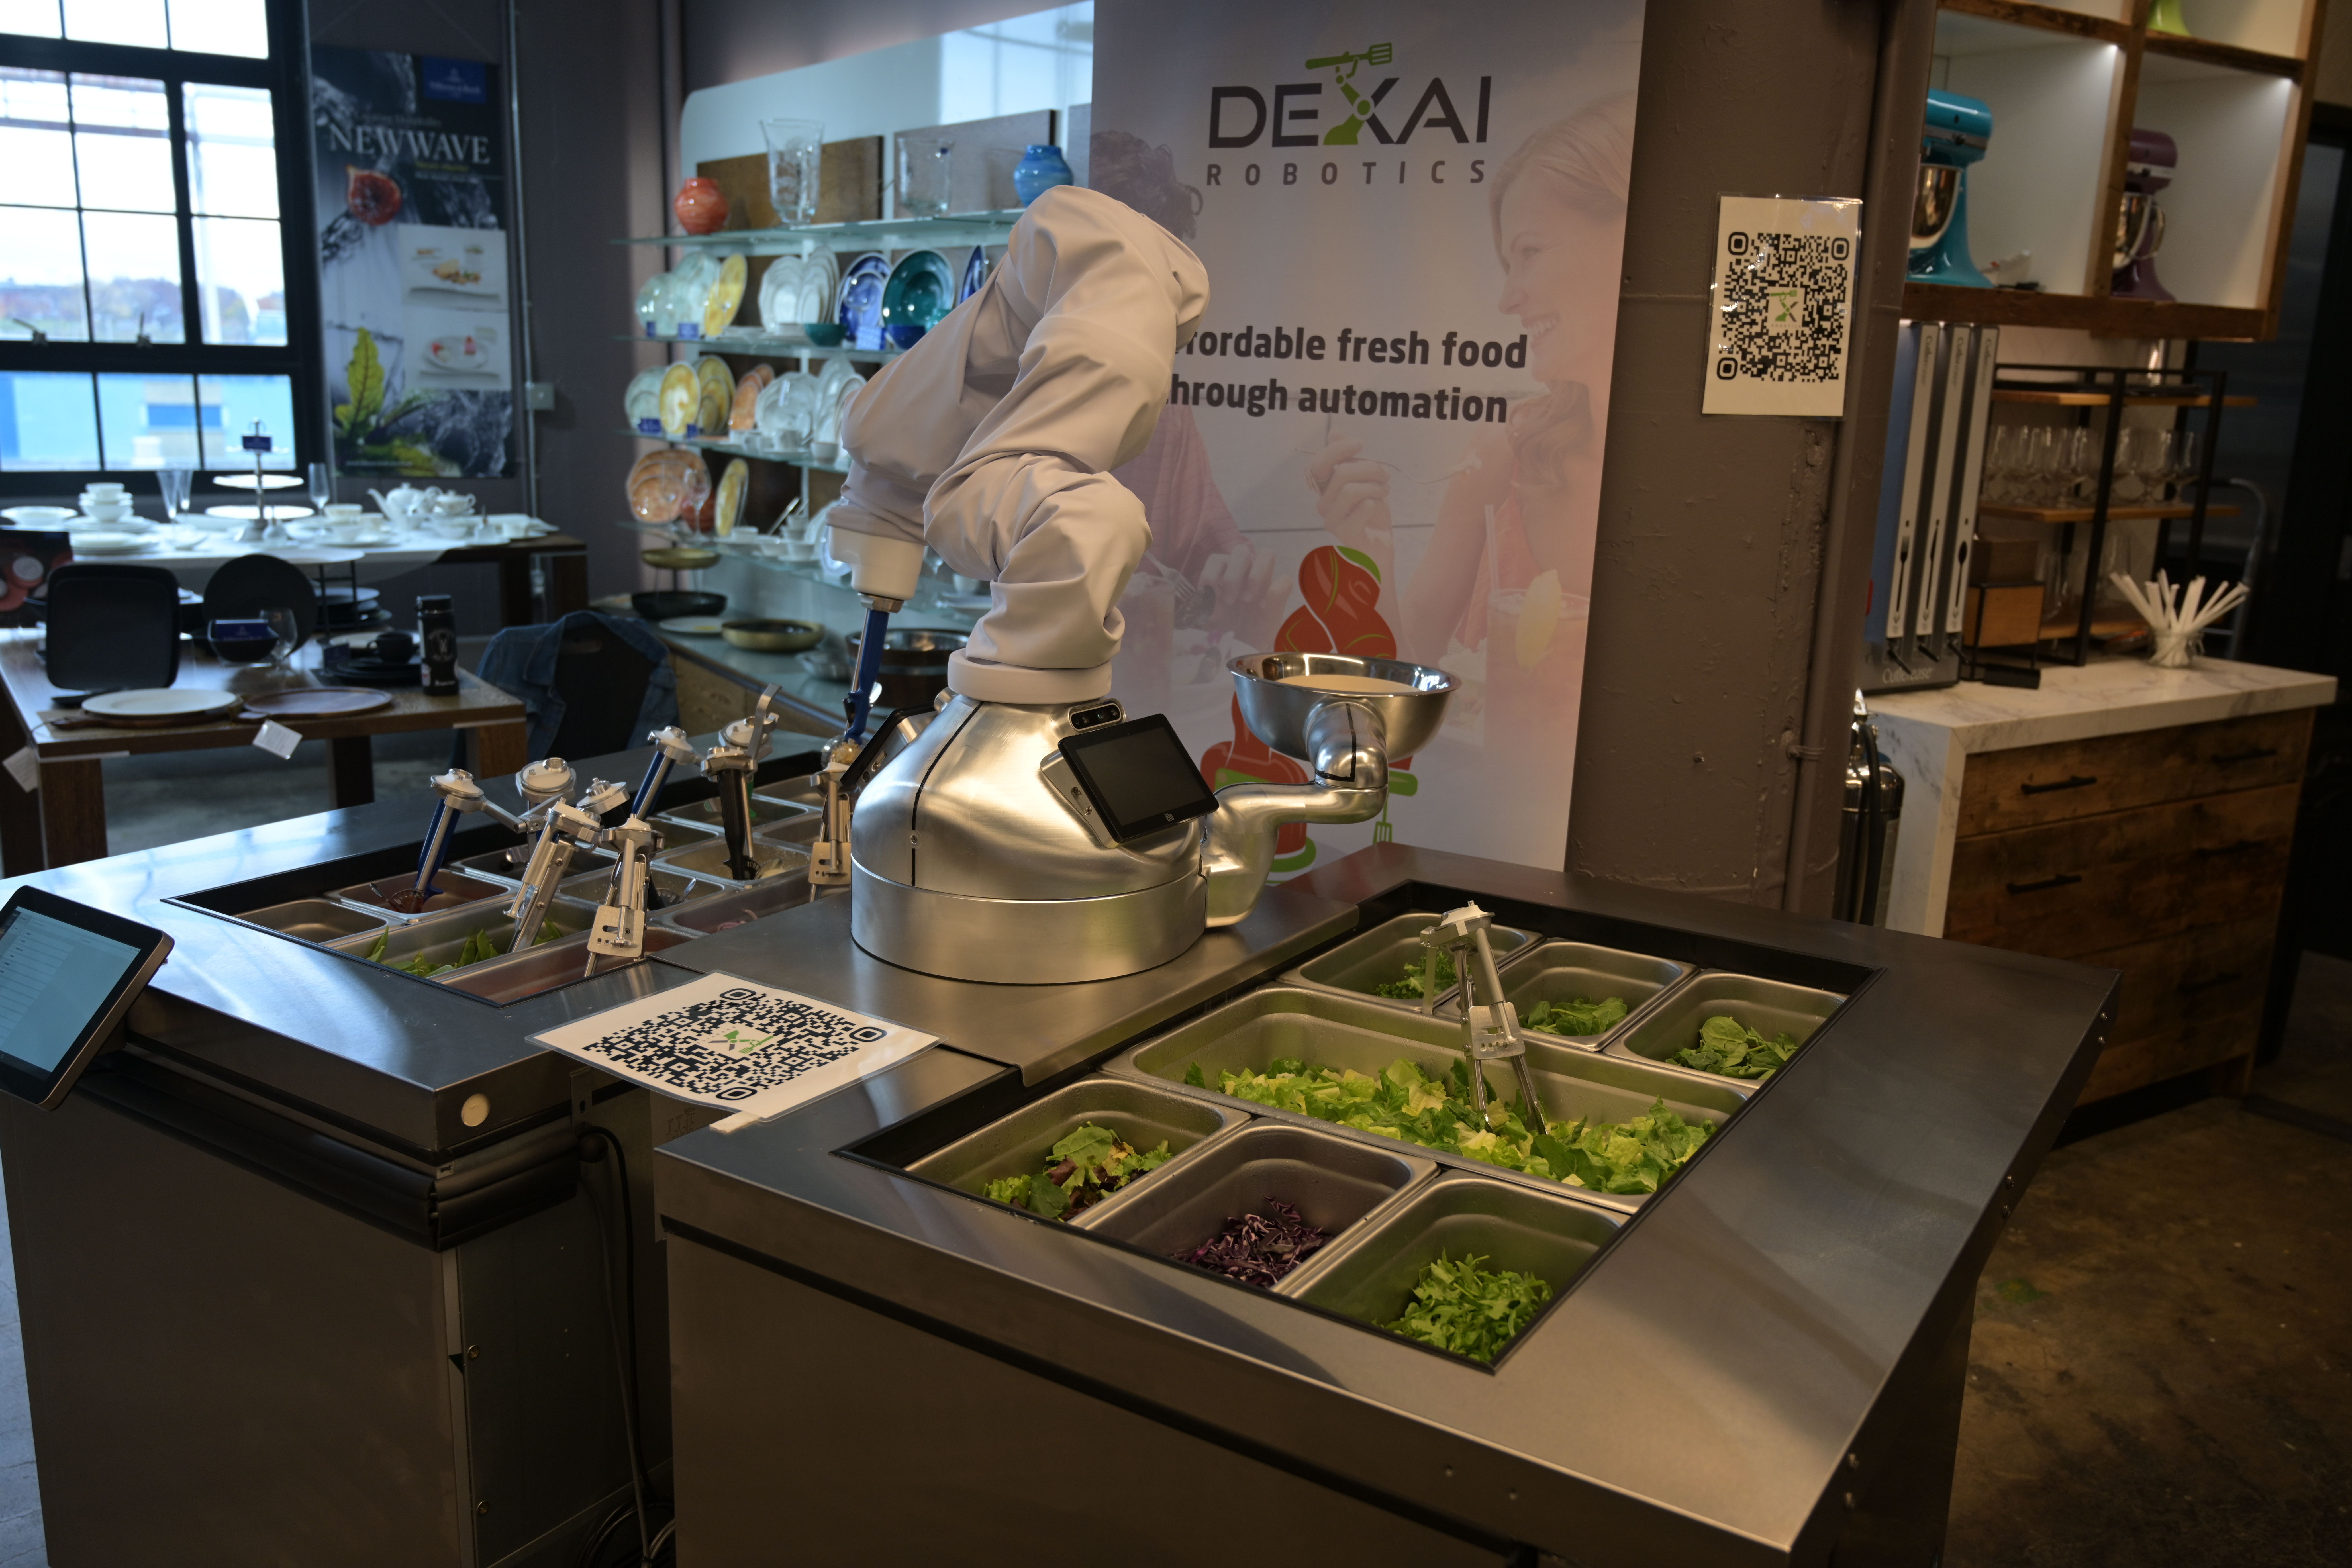 Dexai designs Alfred 2.0 for safe food service to help restaurants during pandemic